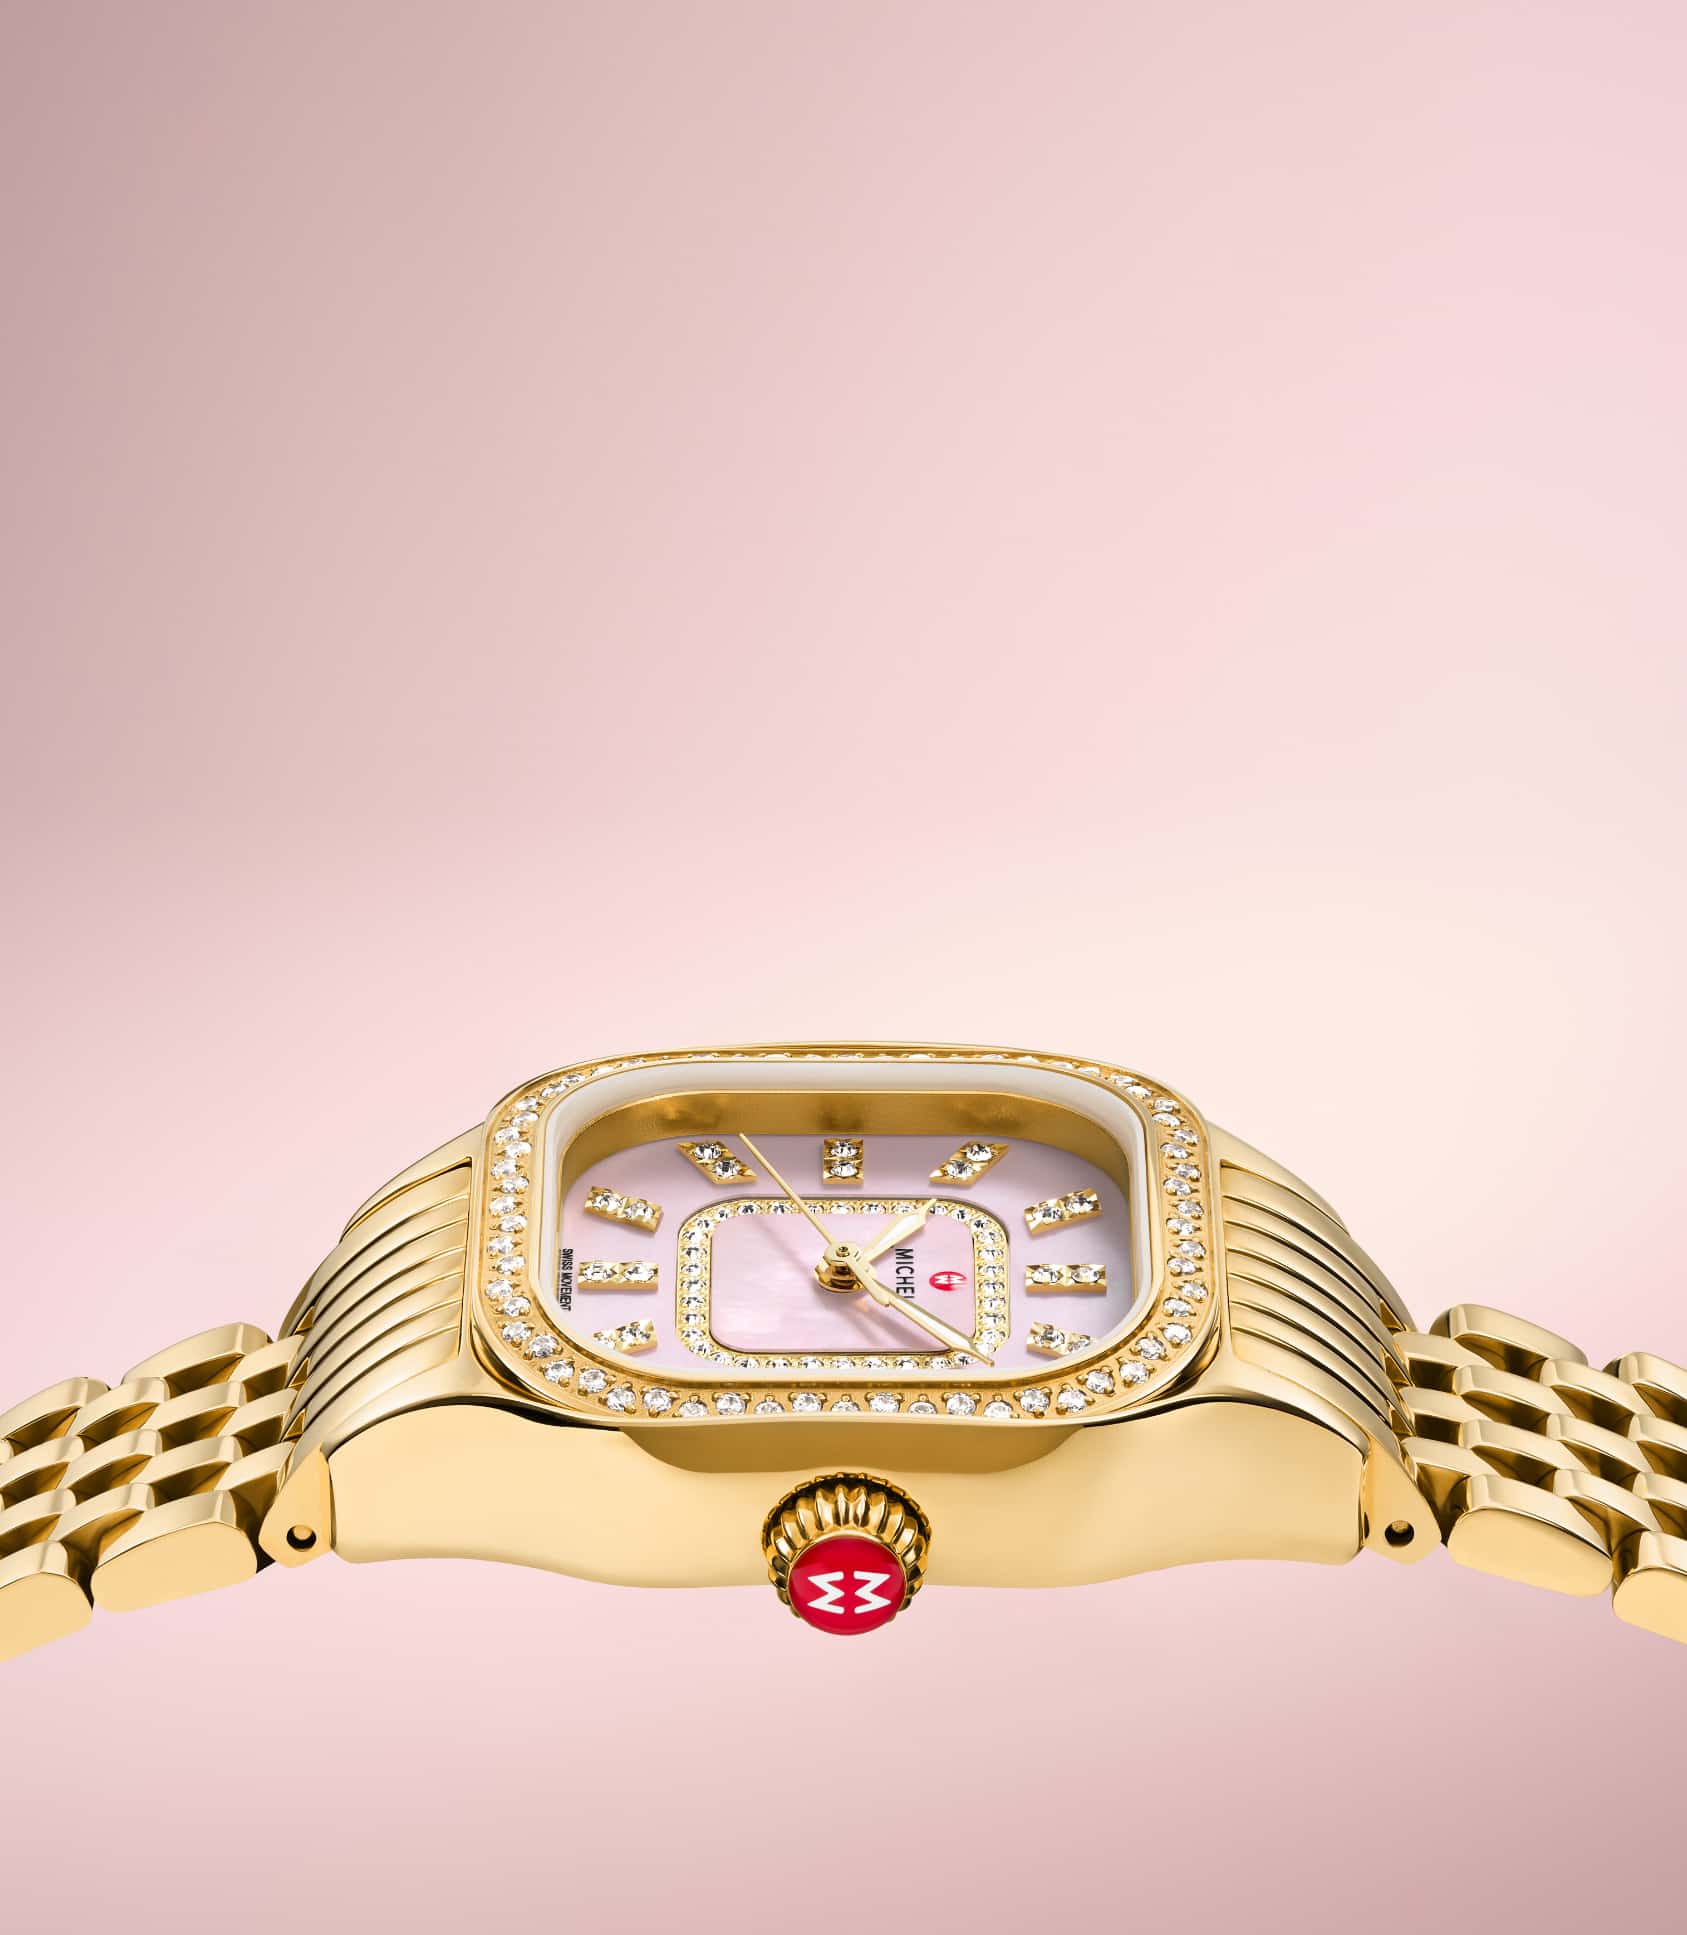 MICHELE Meggie watch in gold with a pink mother-of-pearl dial